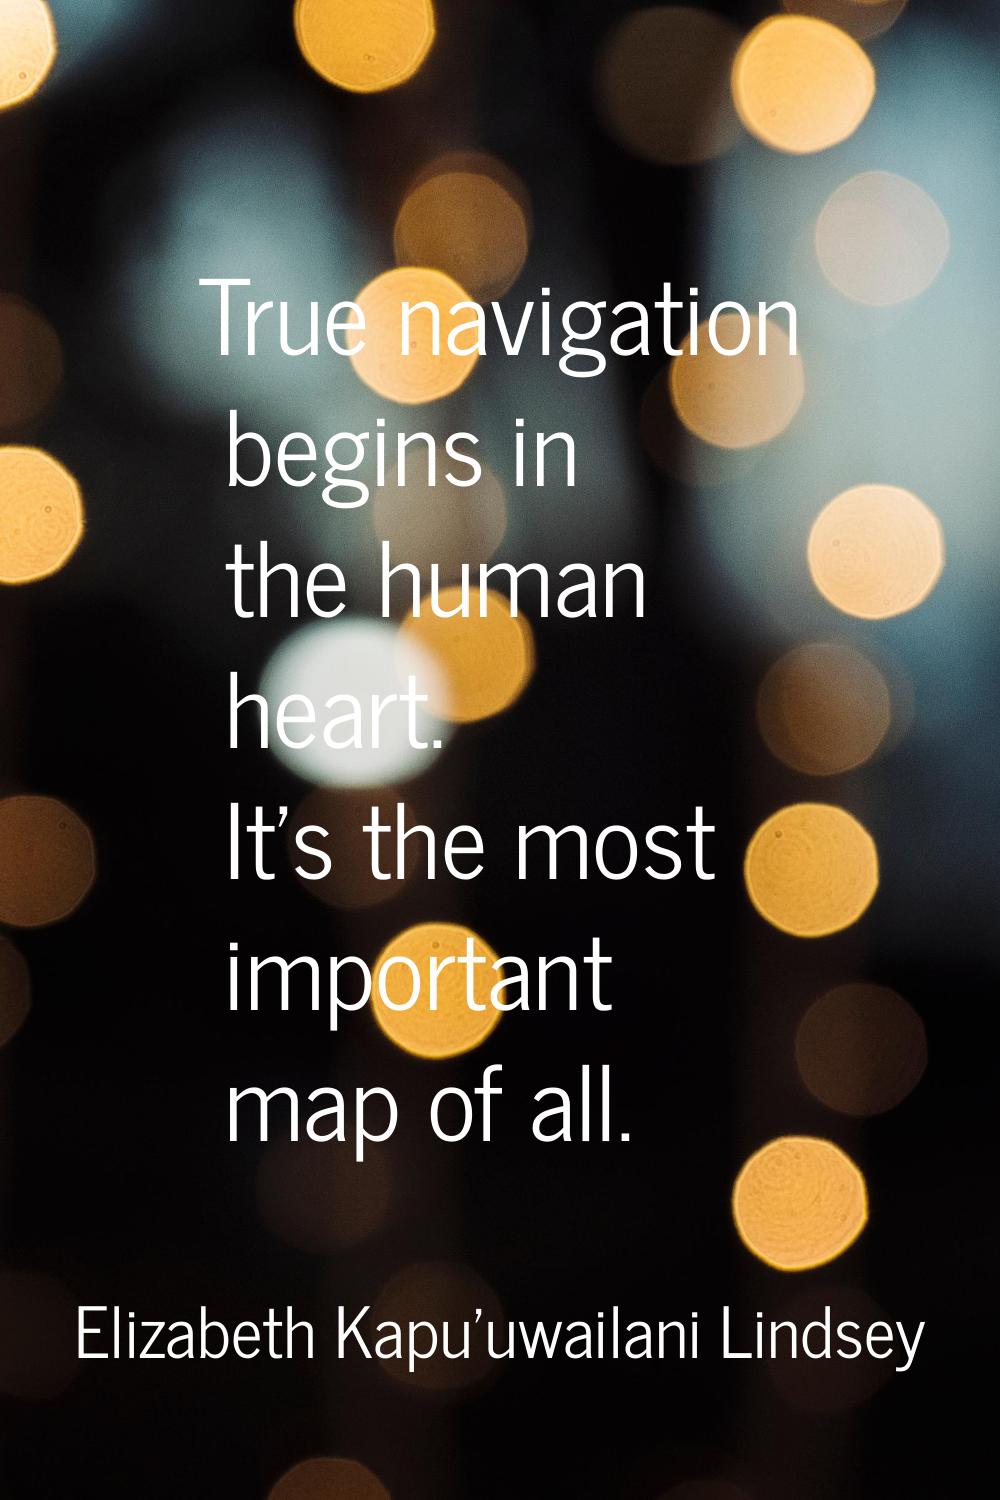 True navigation begins in the human heart. It's the most important map of all.